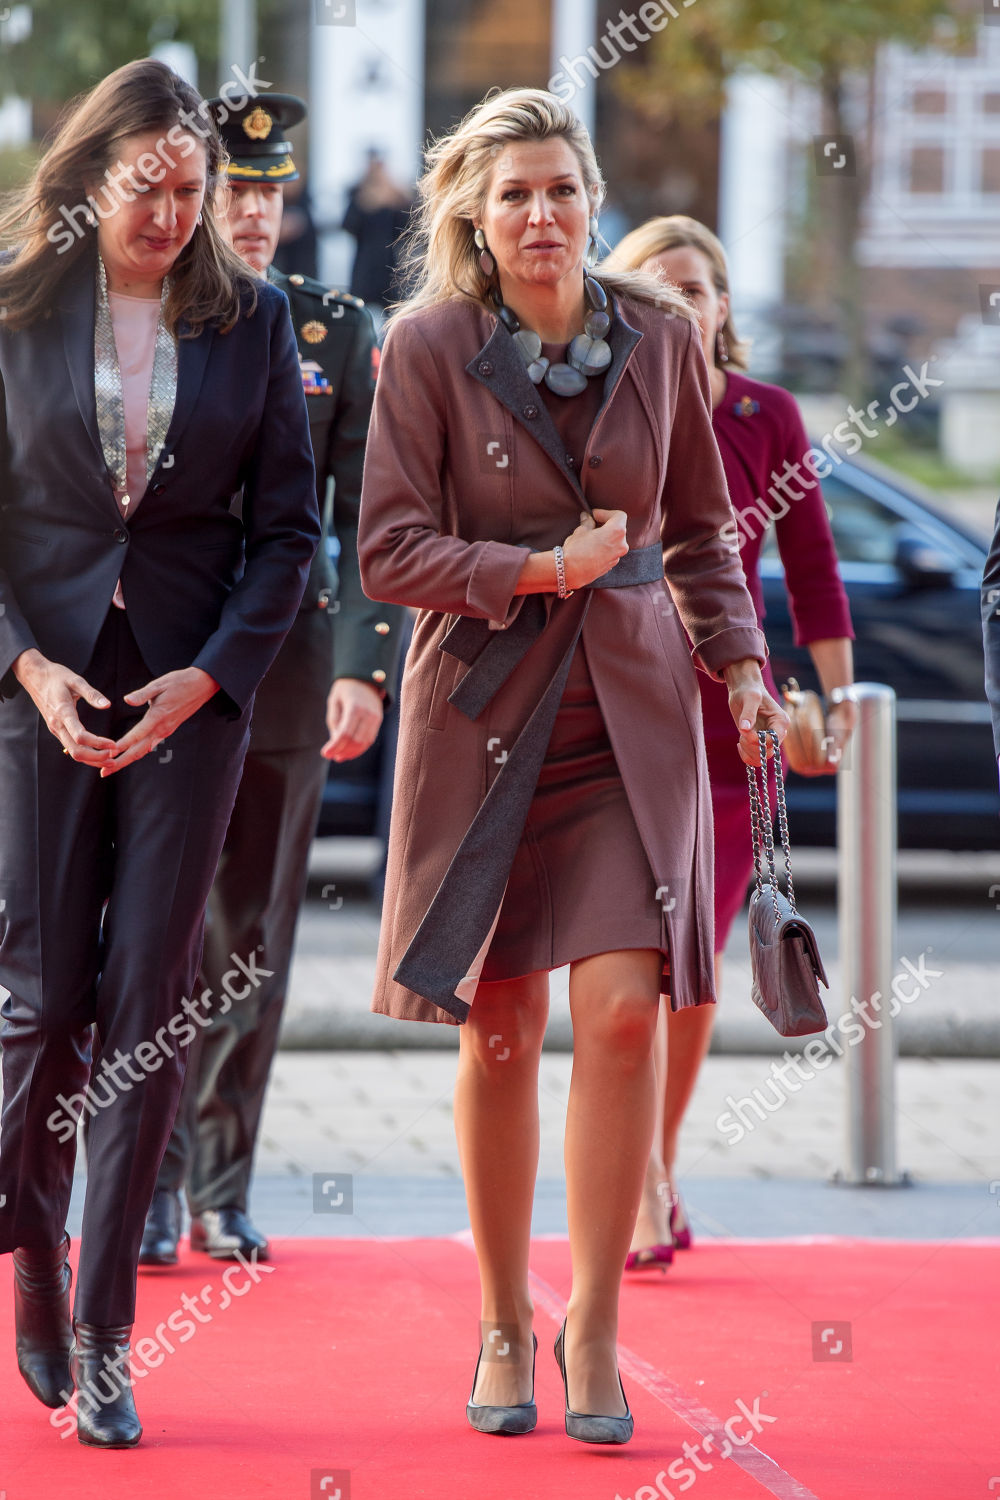 queen-maxima-visit-to-113-suicide-prevention-amsterdam-the-netherlands-shutterstock-editorial-9958871h.jpg